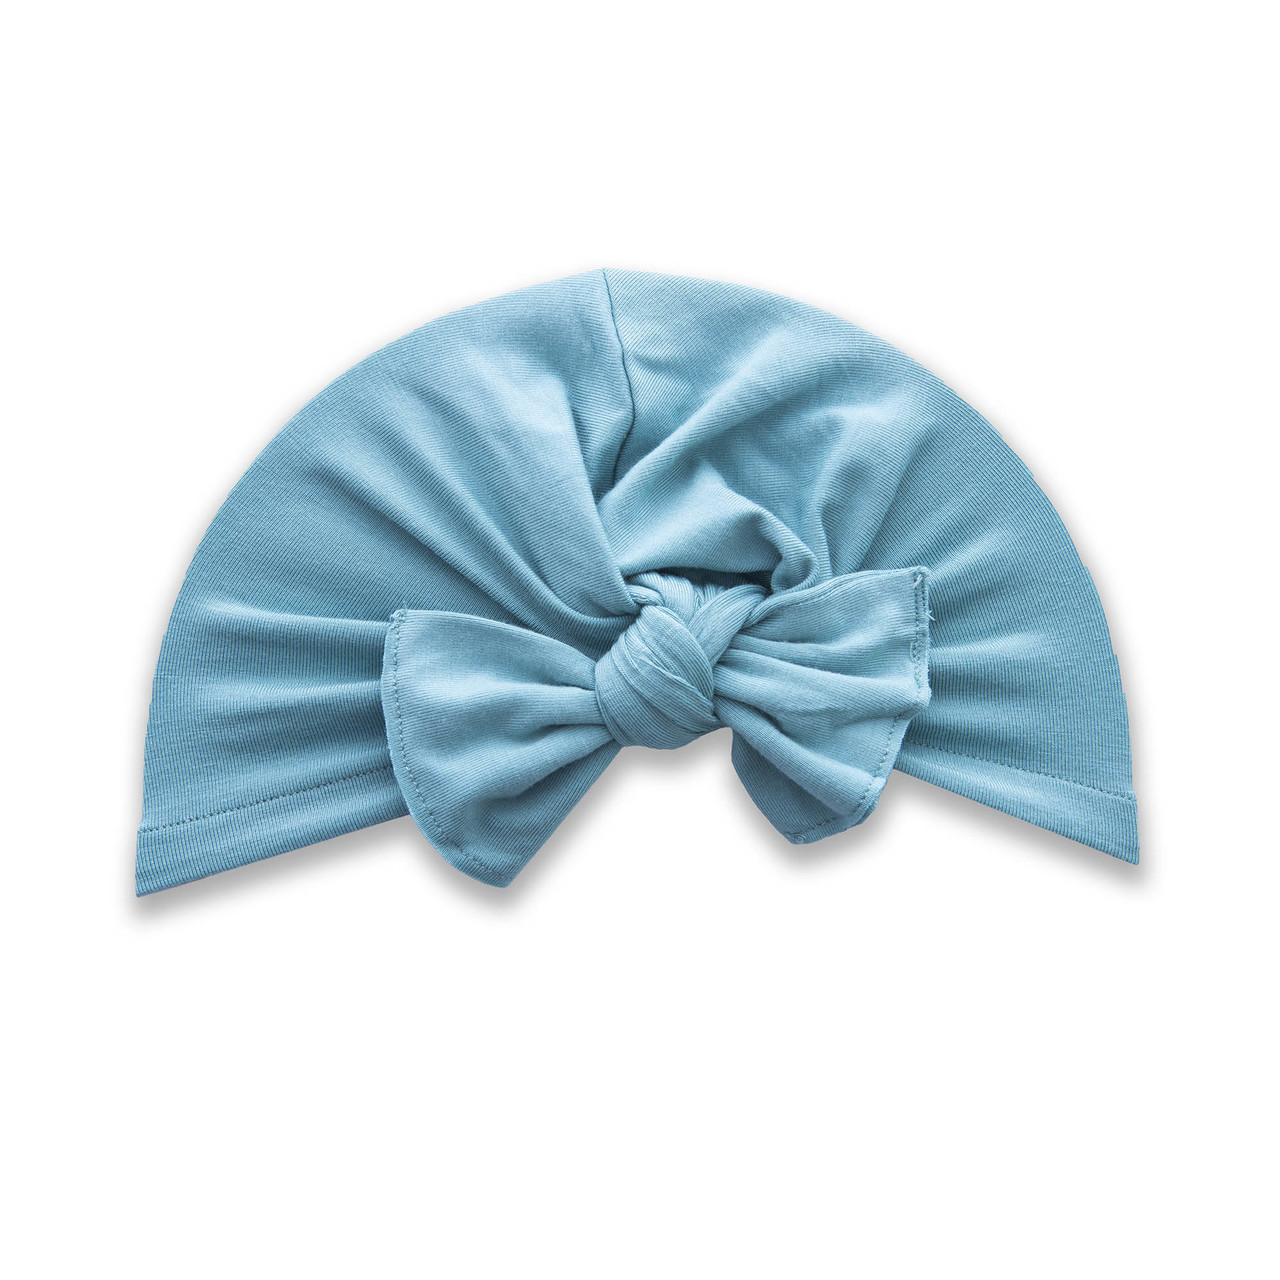 Baby Bling Knot Turban in Teal